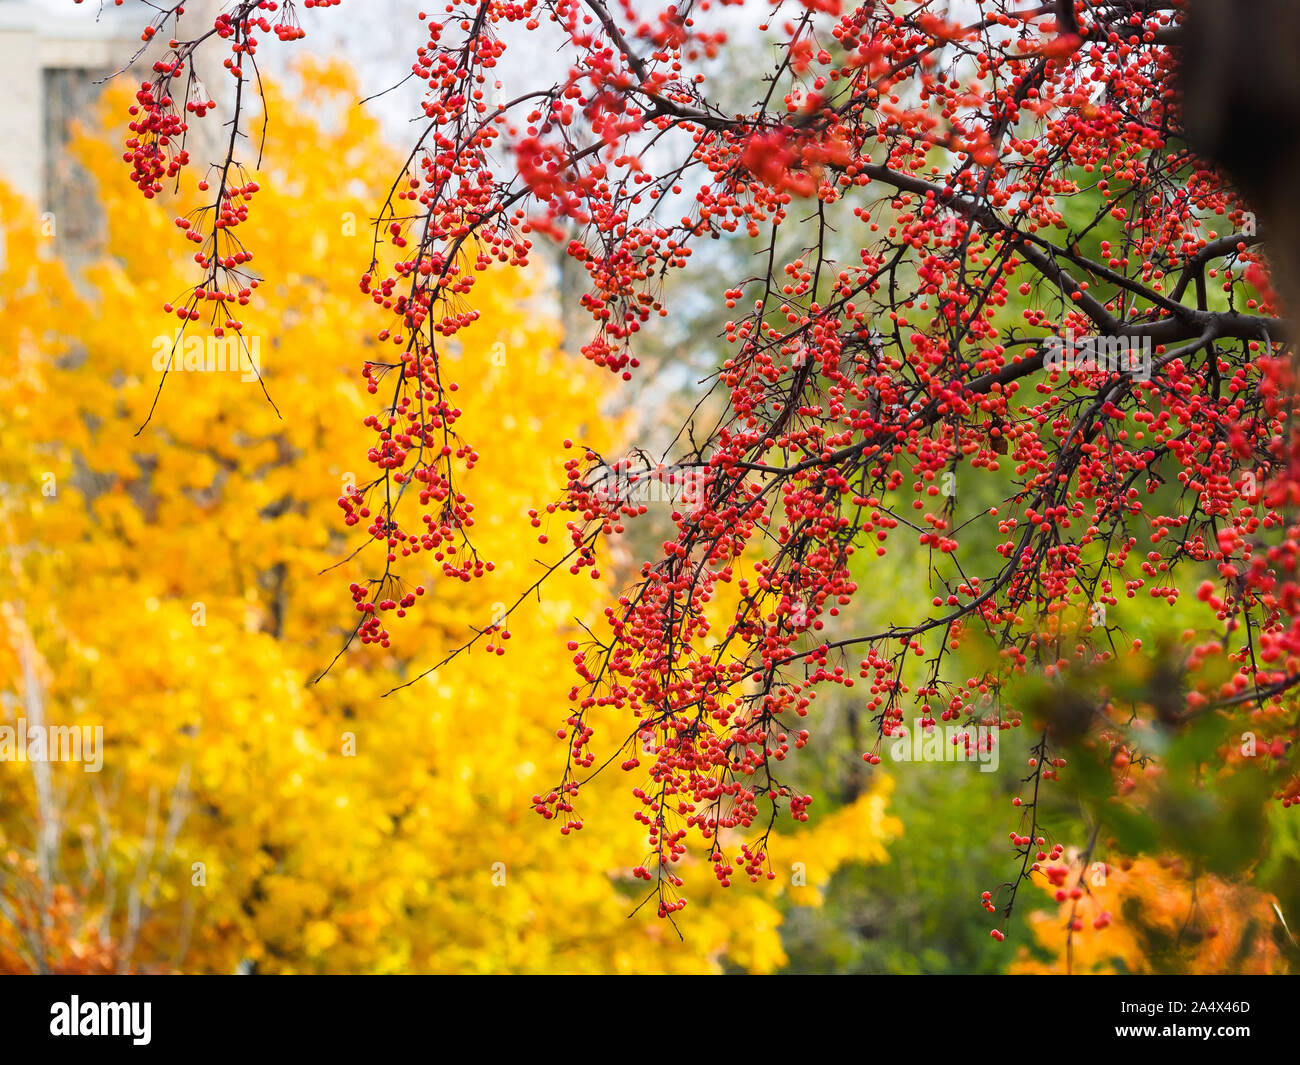 Beautiful little red fruits on Chinese crab apple tree branches hanging in front of yellow maple tree leaves in autumn. Stock Photo